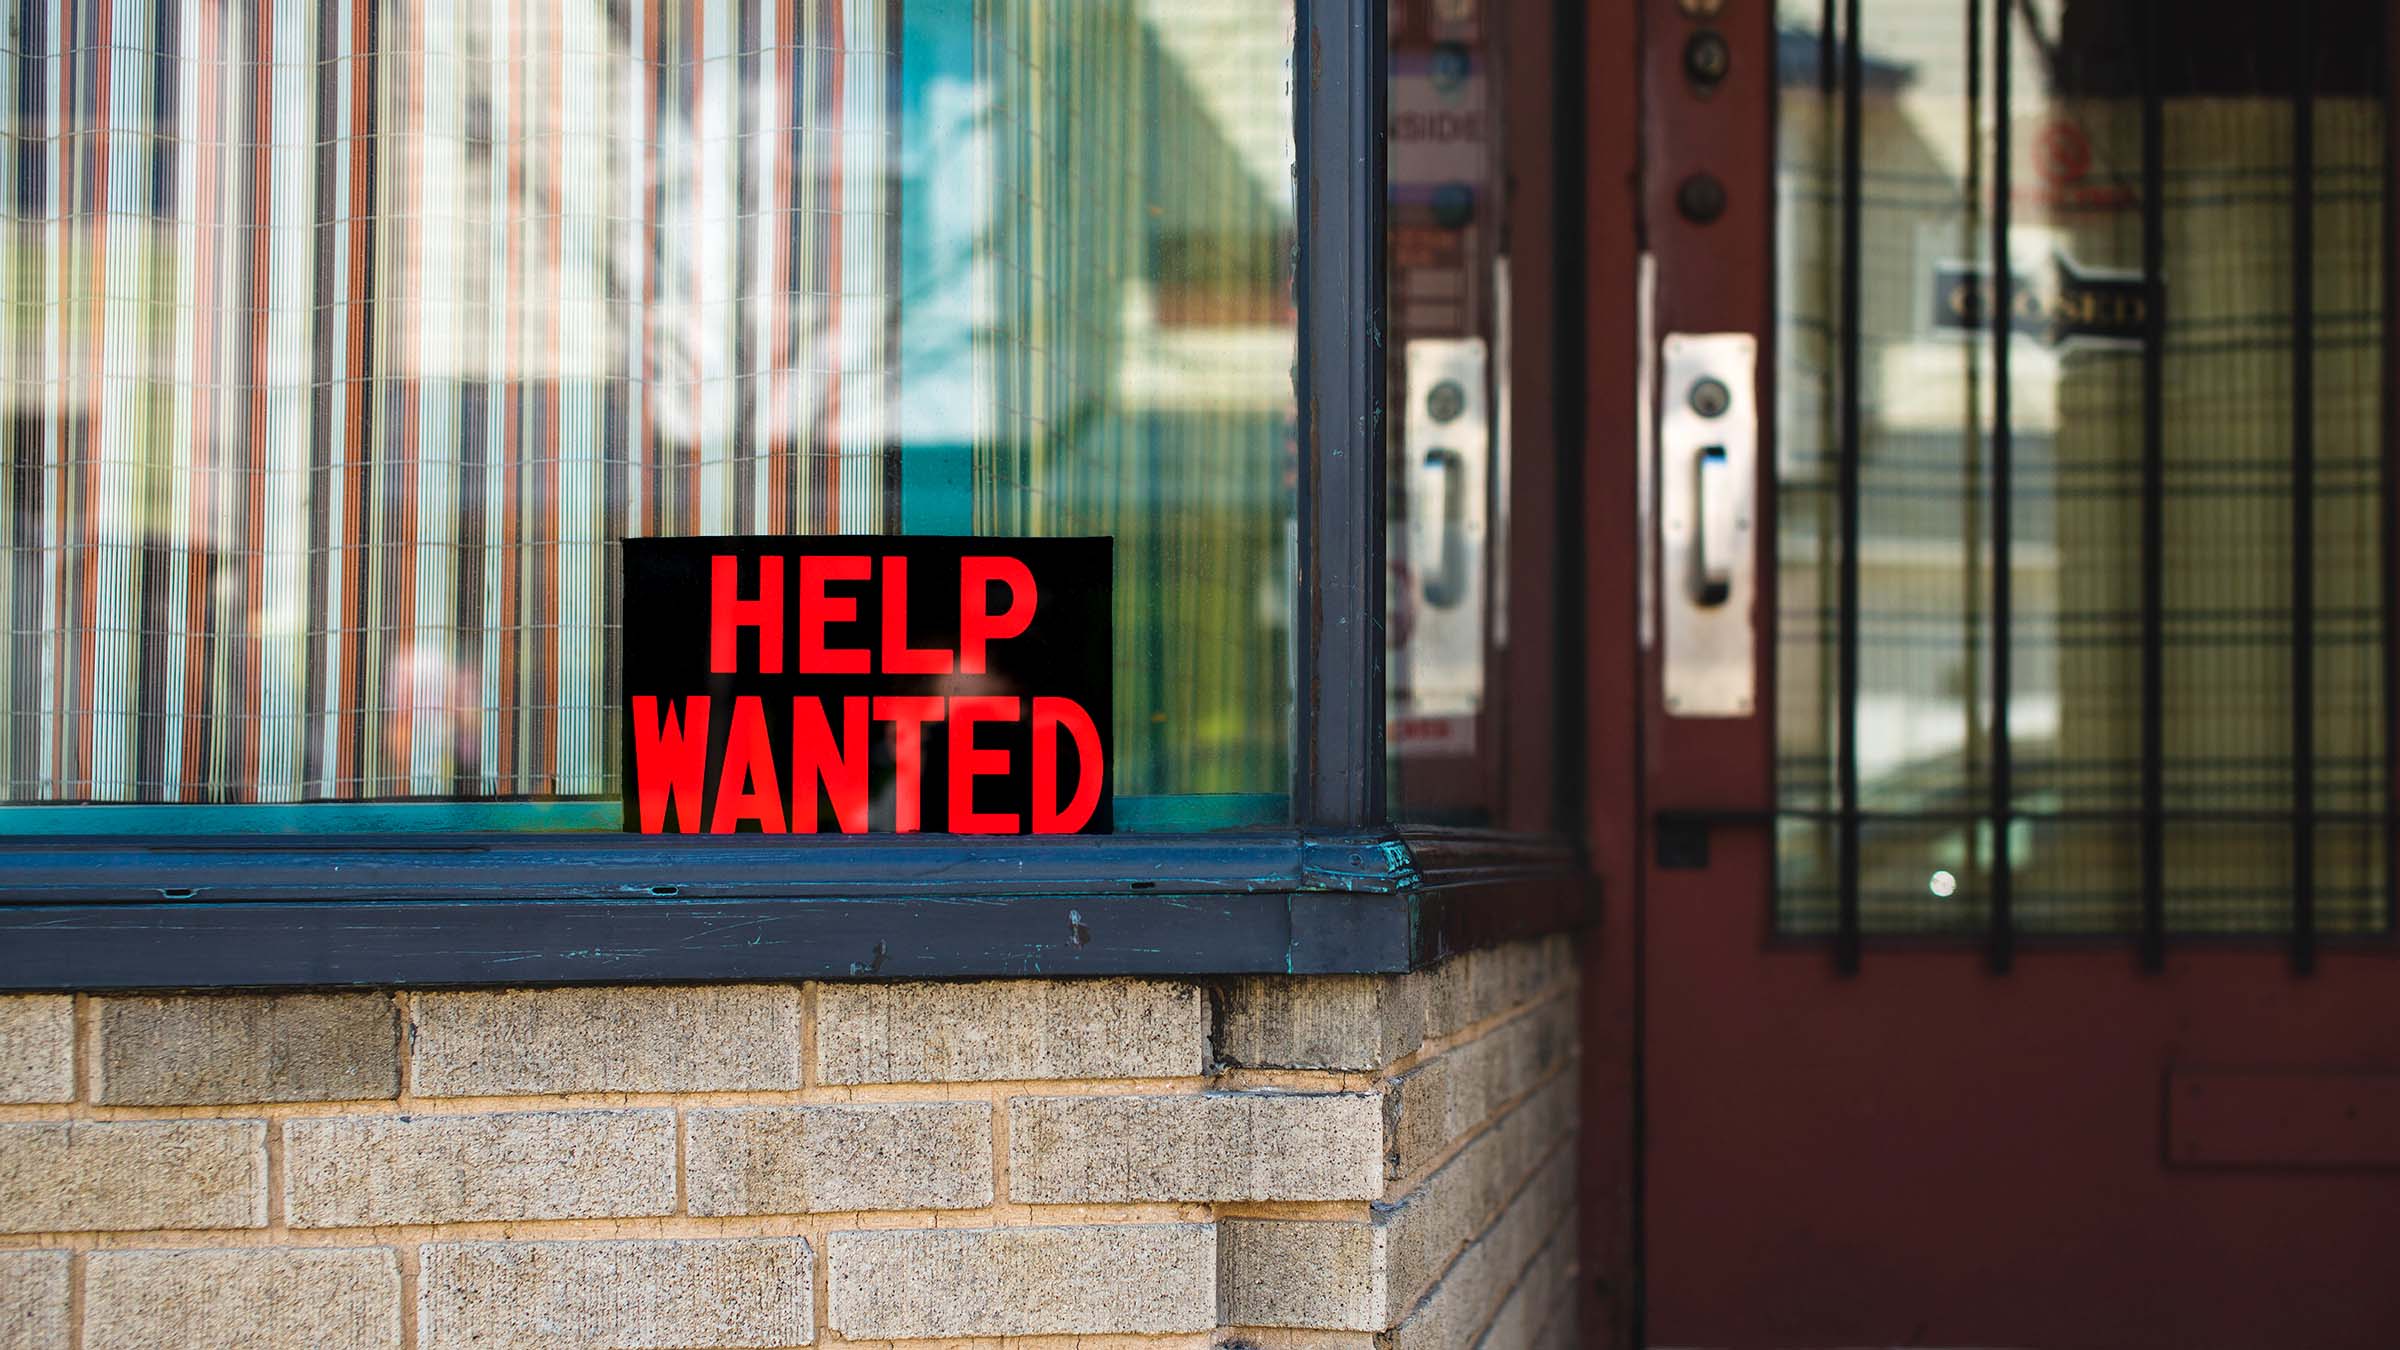 Help wanted sign in a store window